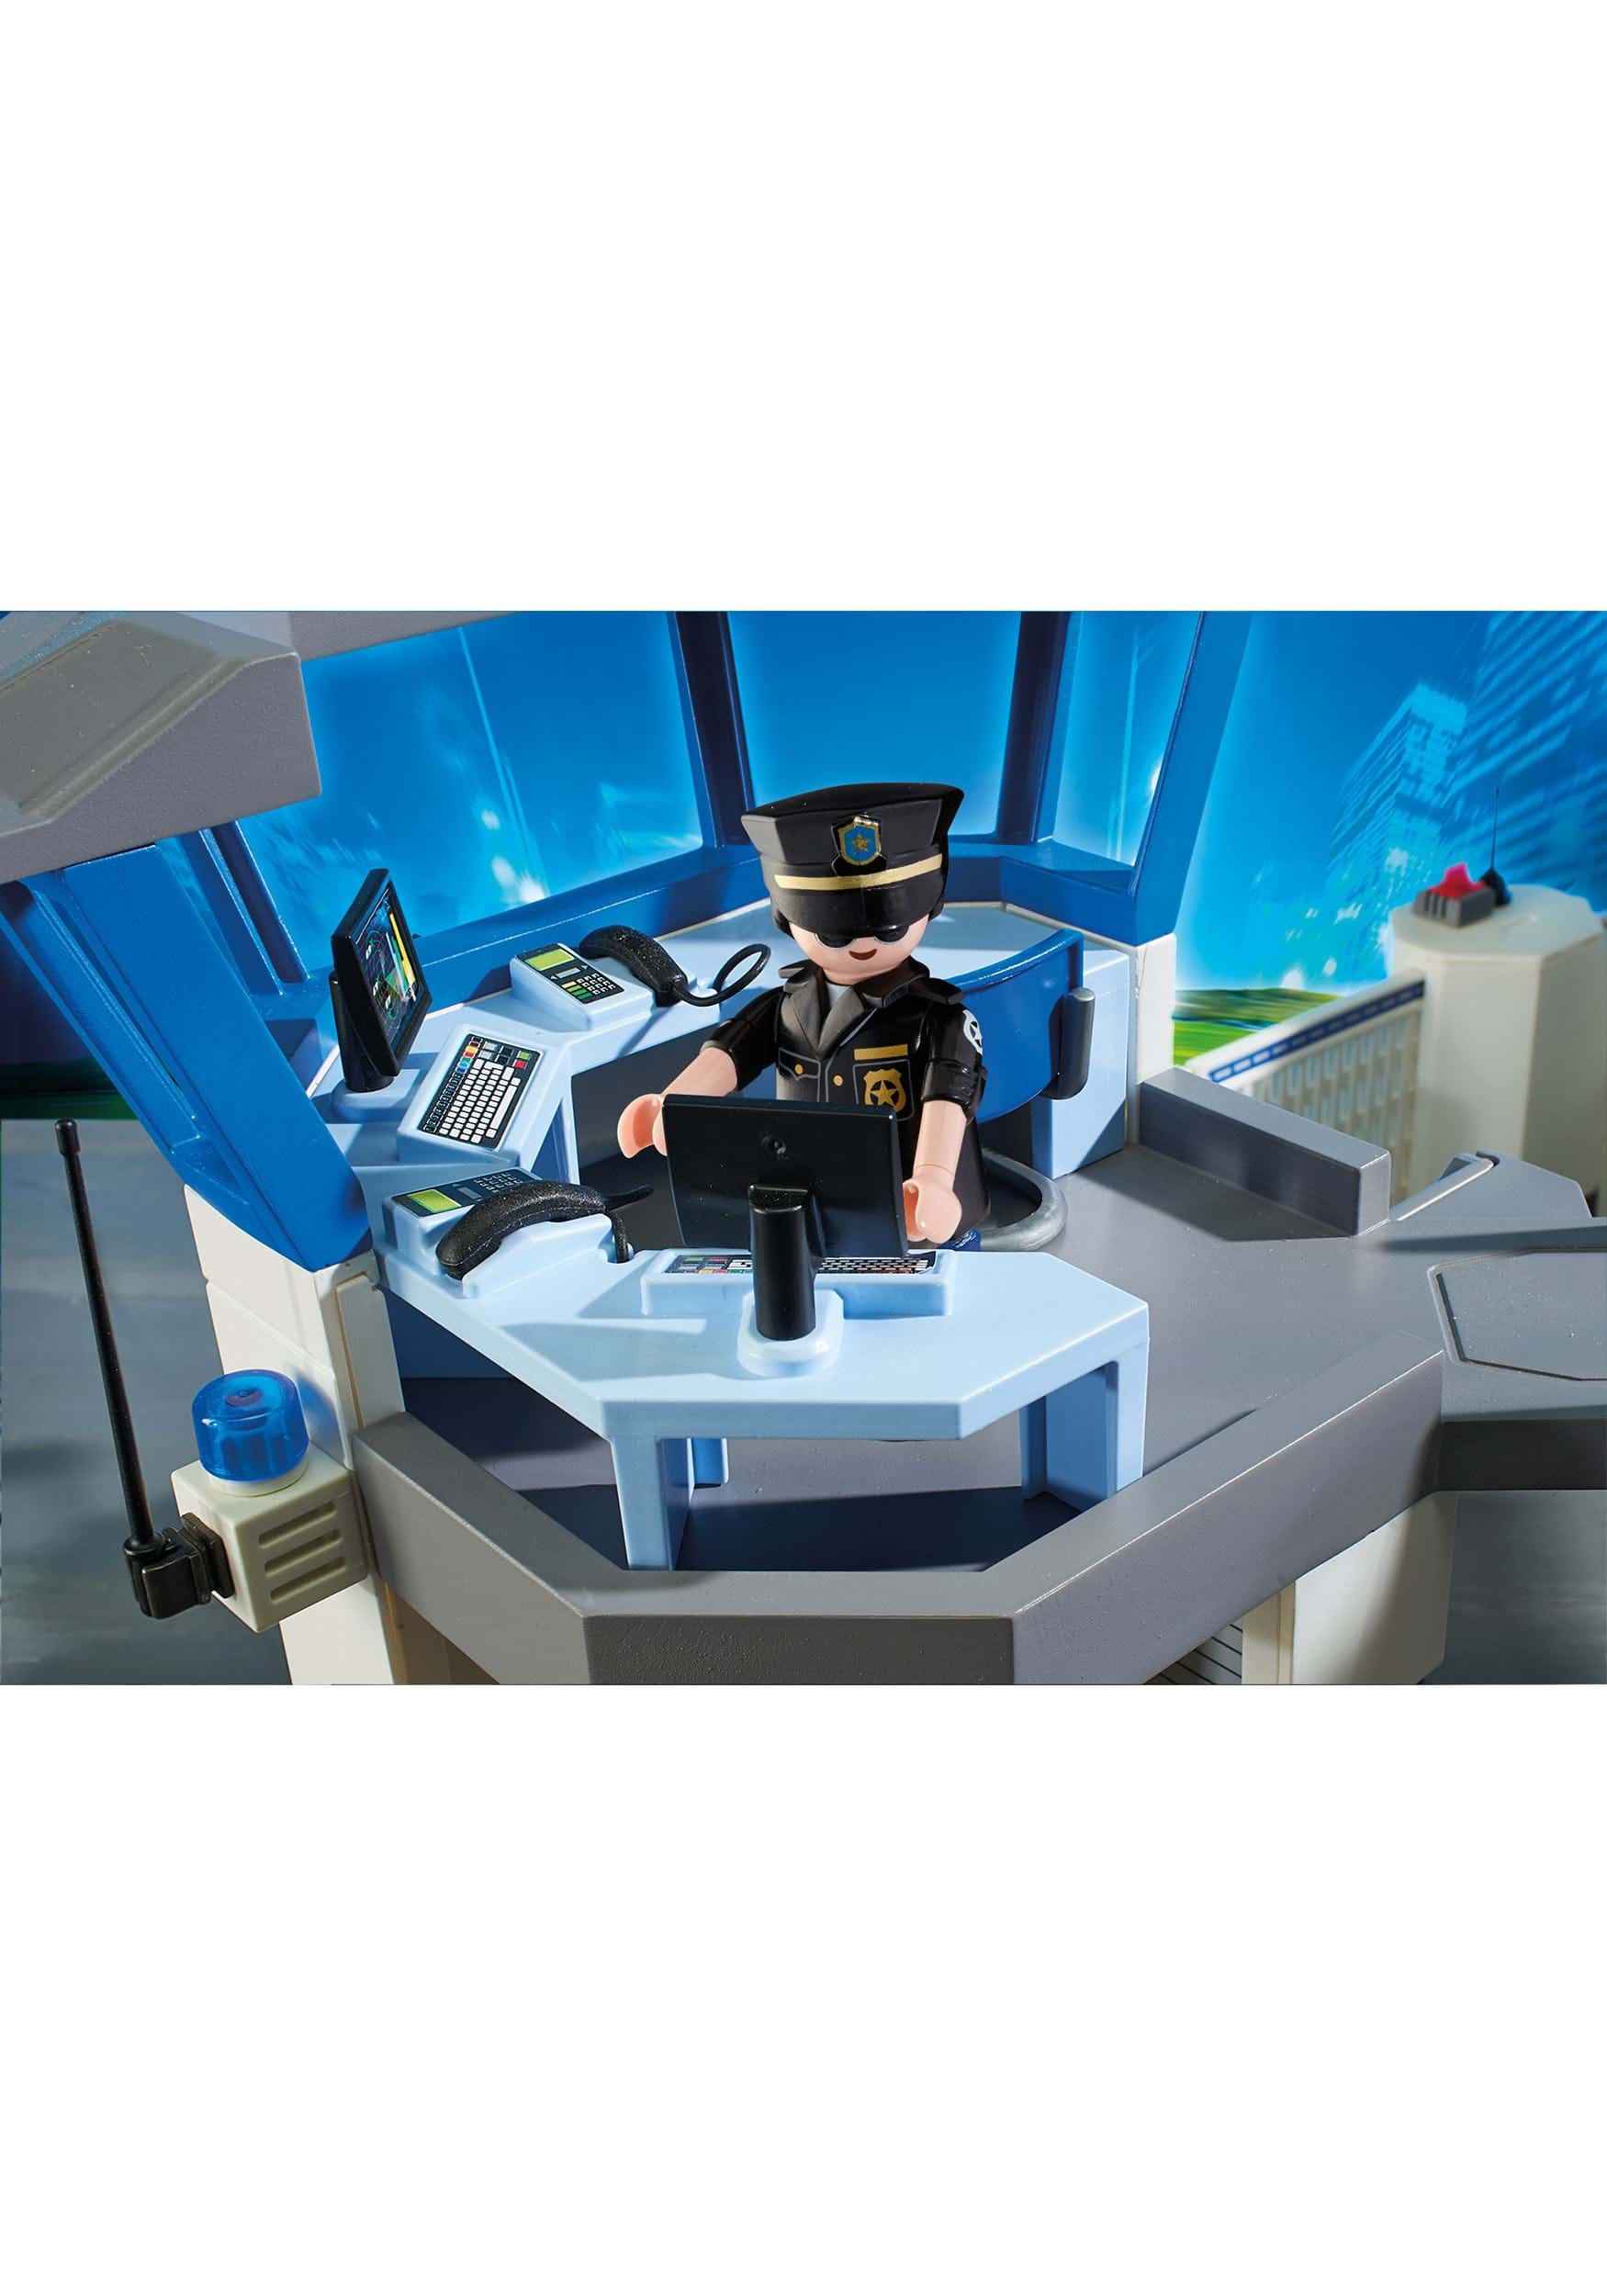 Police Command Center with Prison Playmobil Playset